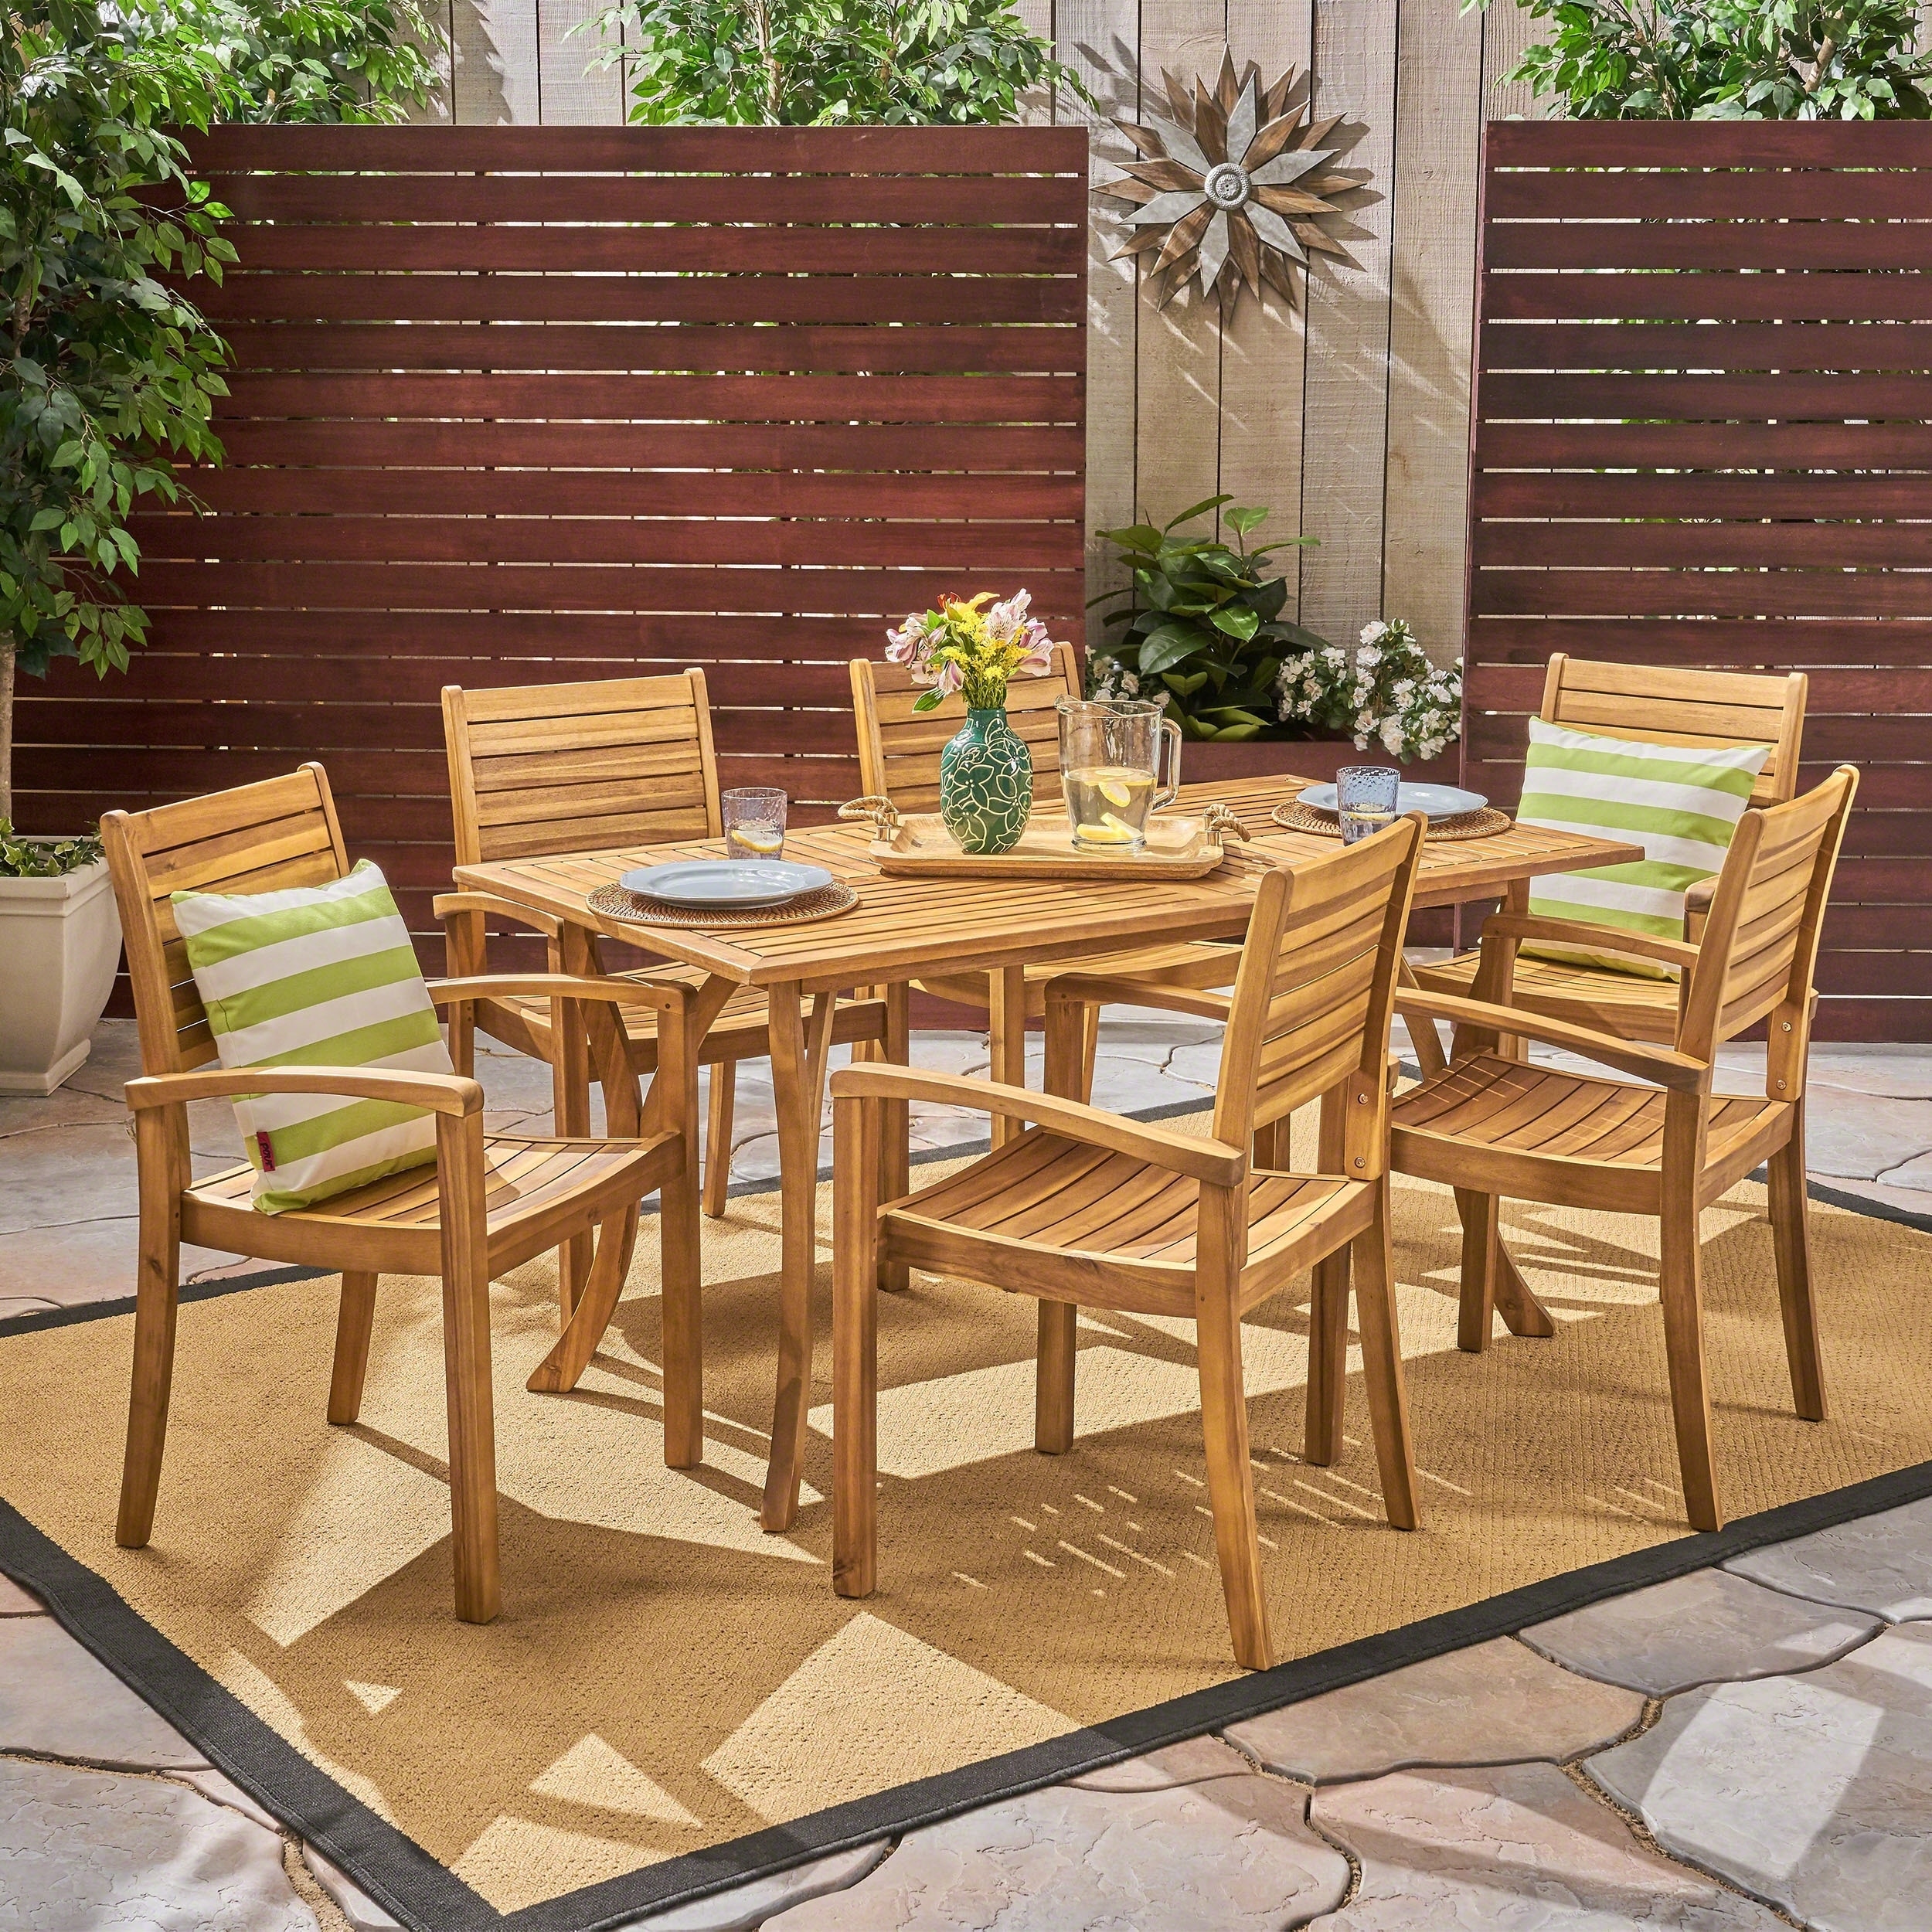 Anchor Outdoor 6-seater Rectangular Acacia Wood Dining Set By Christopher Knight Home